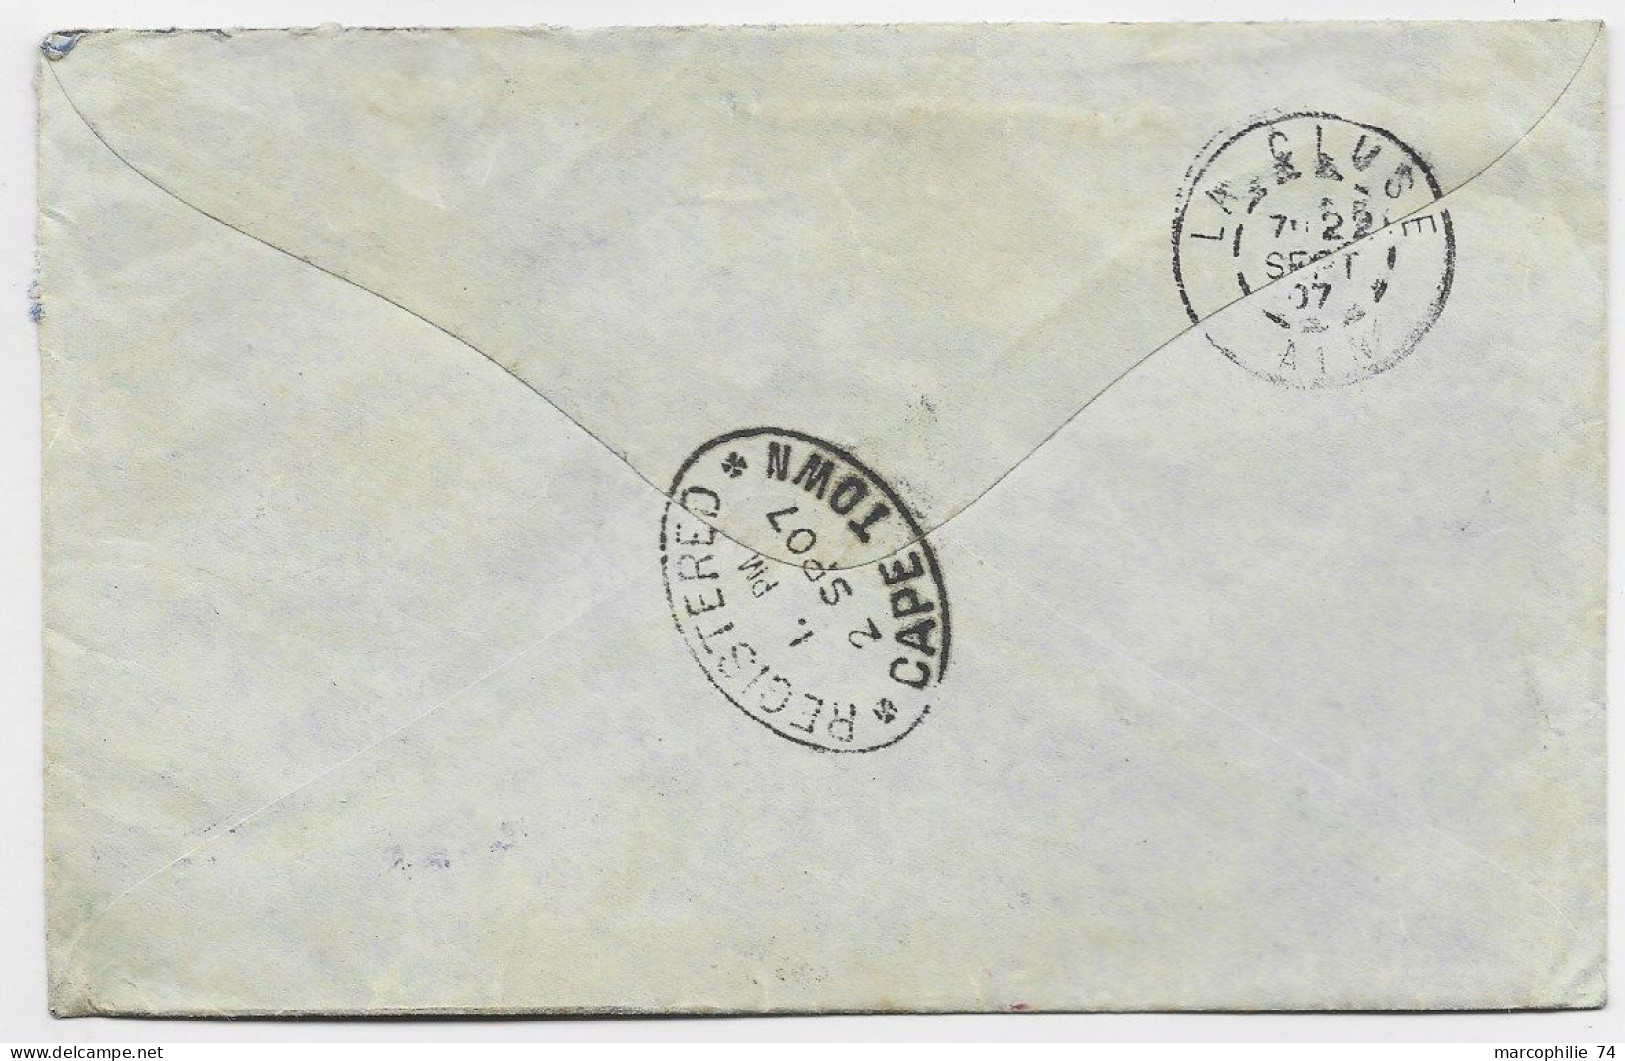 CAPE OF GOOD HOPE 2 1/2C X2 +1D+HALF PENNY LETTRE COVER REG MAL OUVERTE CAPE TOWN 1907 TO FRANCE - Cape Of Good Hope (1853-1904)